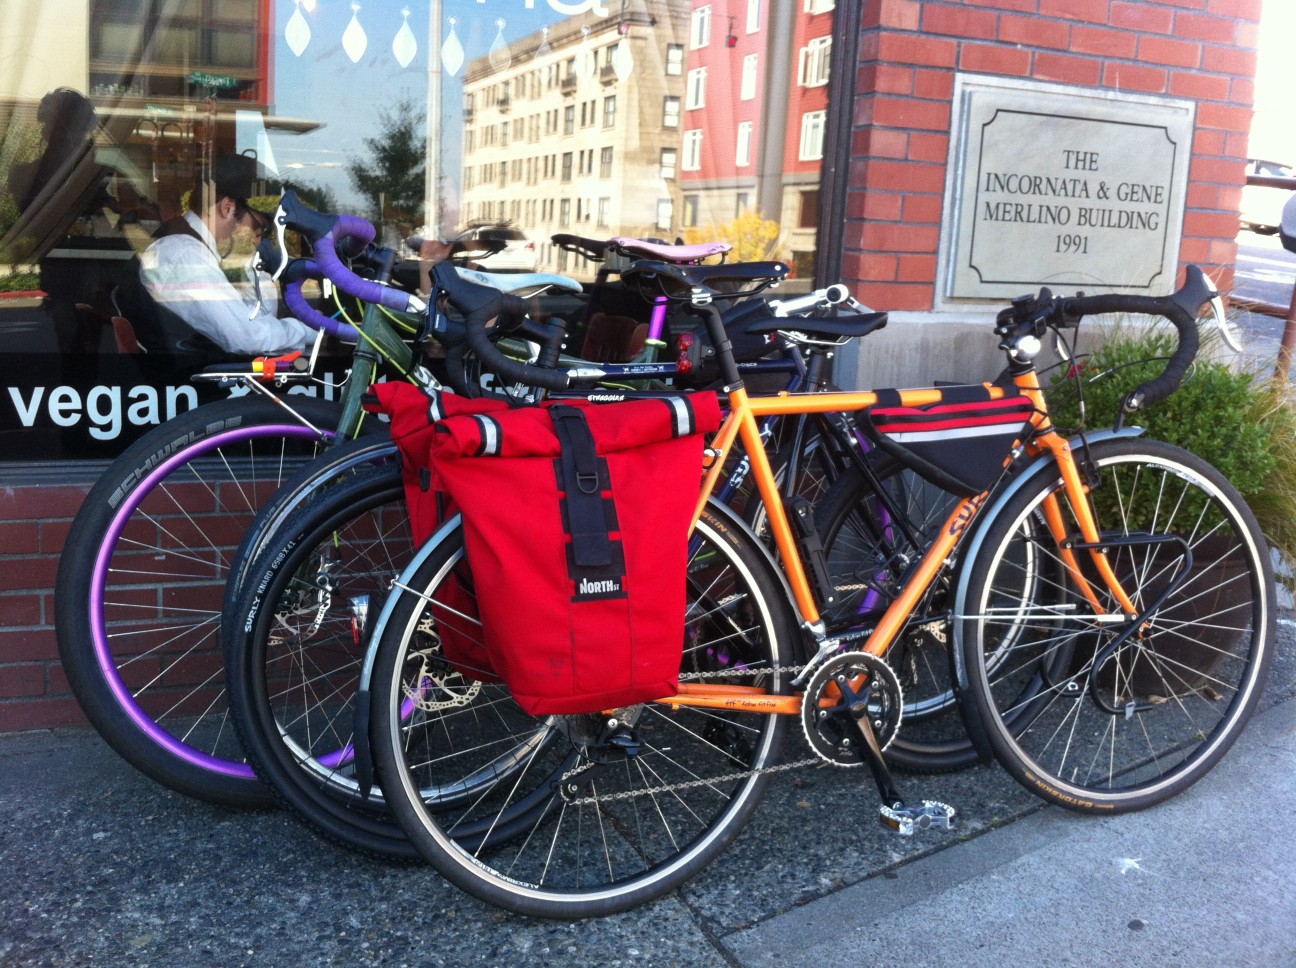 Right side view of Surly bikes, parked side by side, on a sidewalk in front of a window on a building